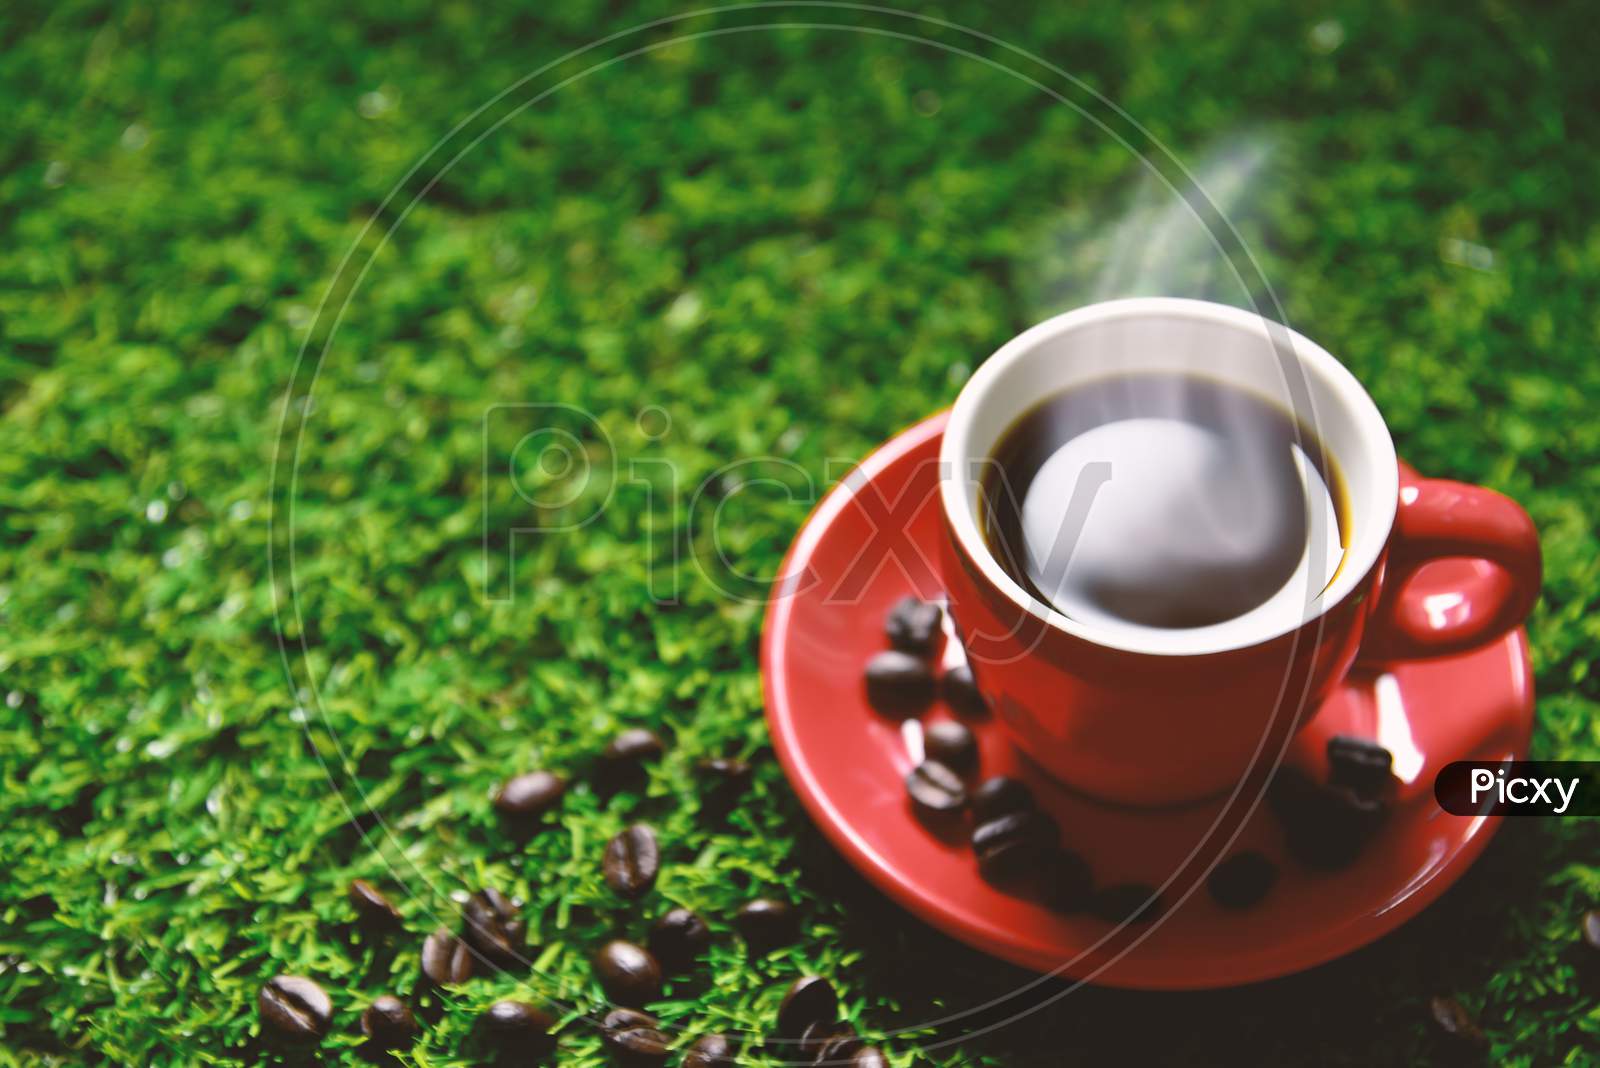 Red Coffee Cup On The Green Grass With Copy Space For Text Or Advertising, Drinking Concept, Love Concept, Relax Concept, Selective Focus On Edge Of Cup